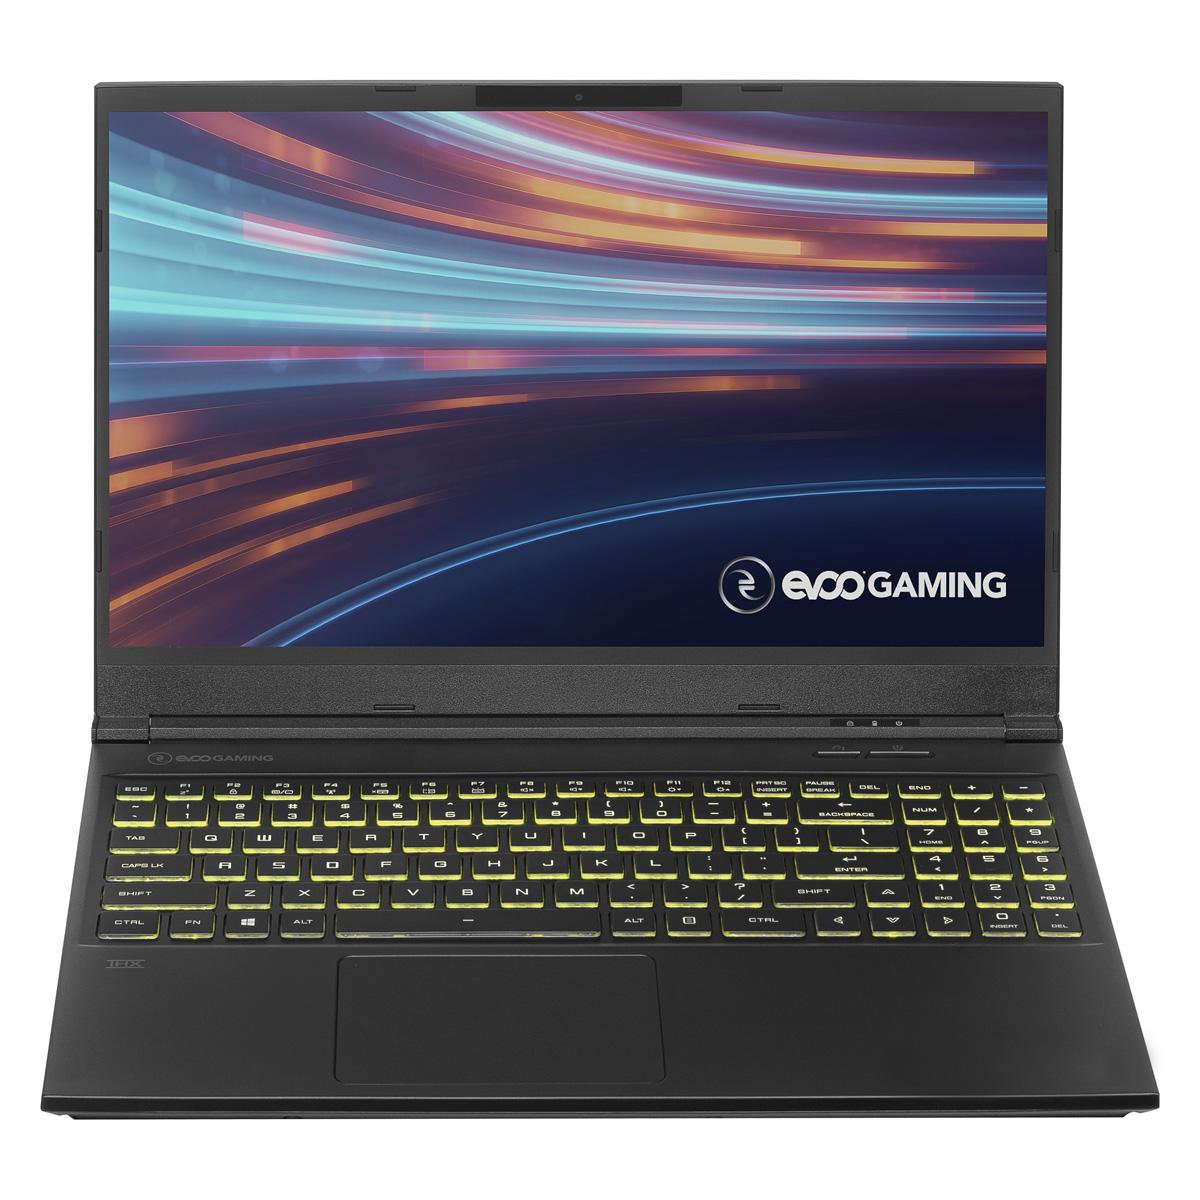 EVOO Gaming 15 i5 8GB Notebook Laptop for $549 Shipped